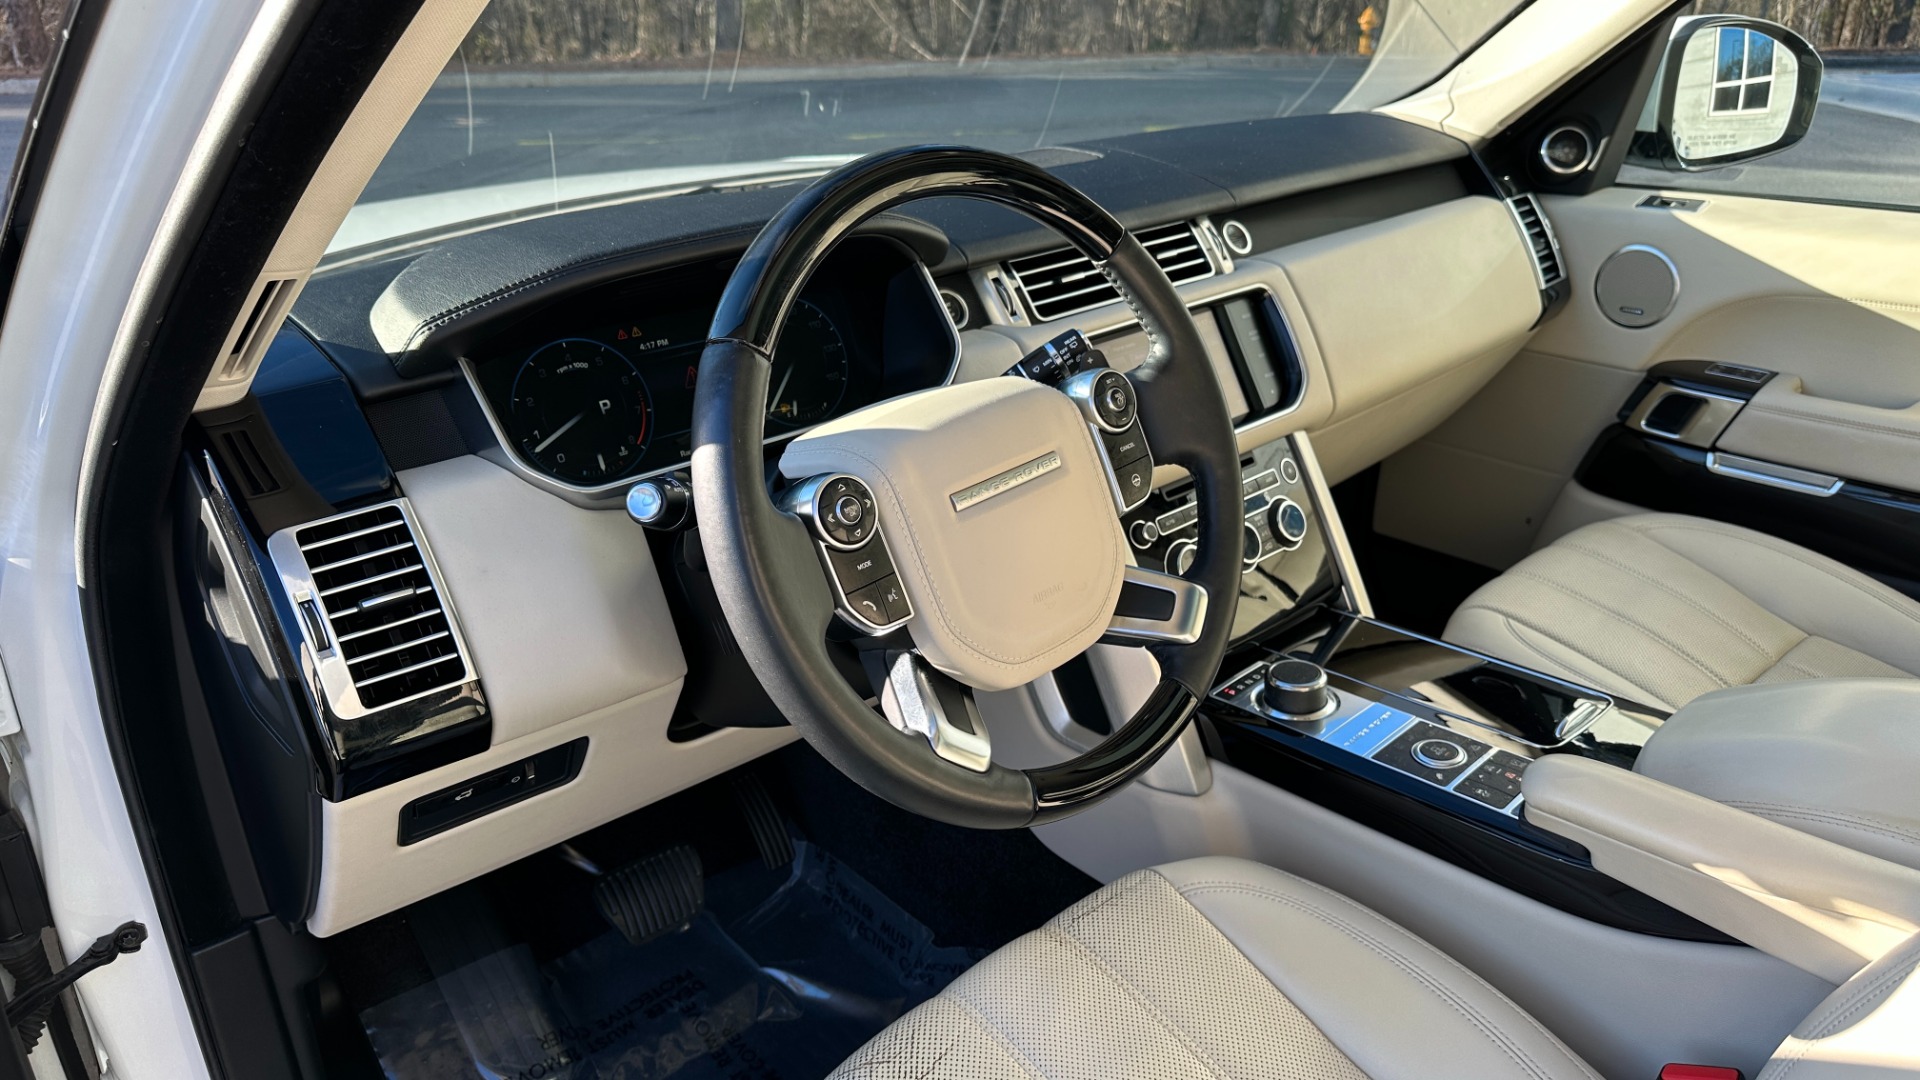 Used 2013 Land Rover Range Rover HSE / MERIDIAN SOUND / TOW PACK / VISION ASSIST / CLIMATE COMFORT for sale $30,995 at Formula Imports in Charlotte NC 28227 11